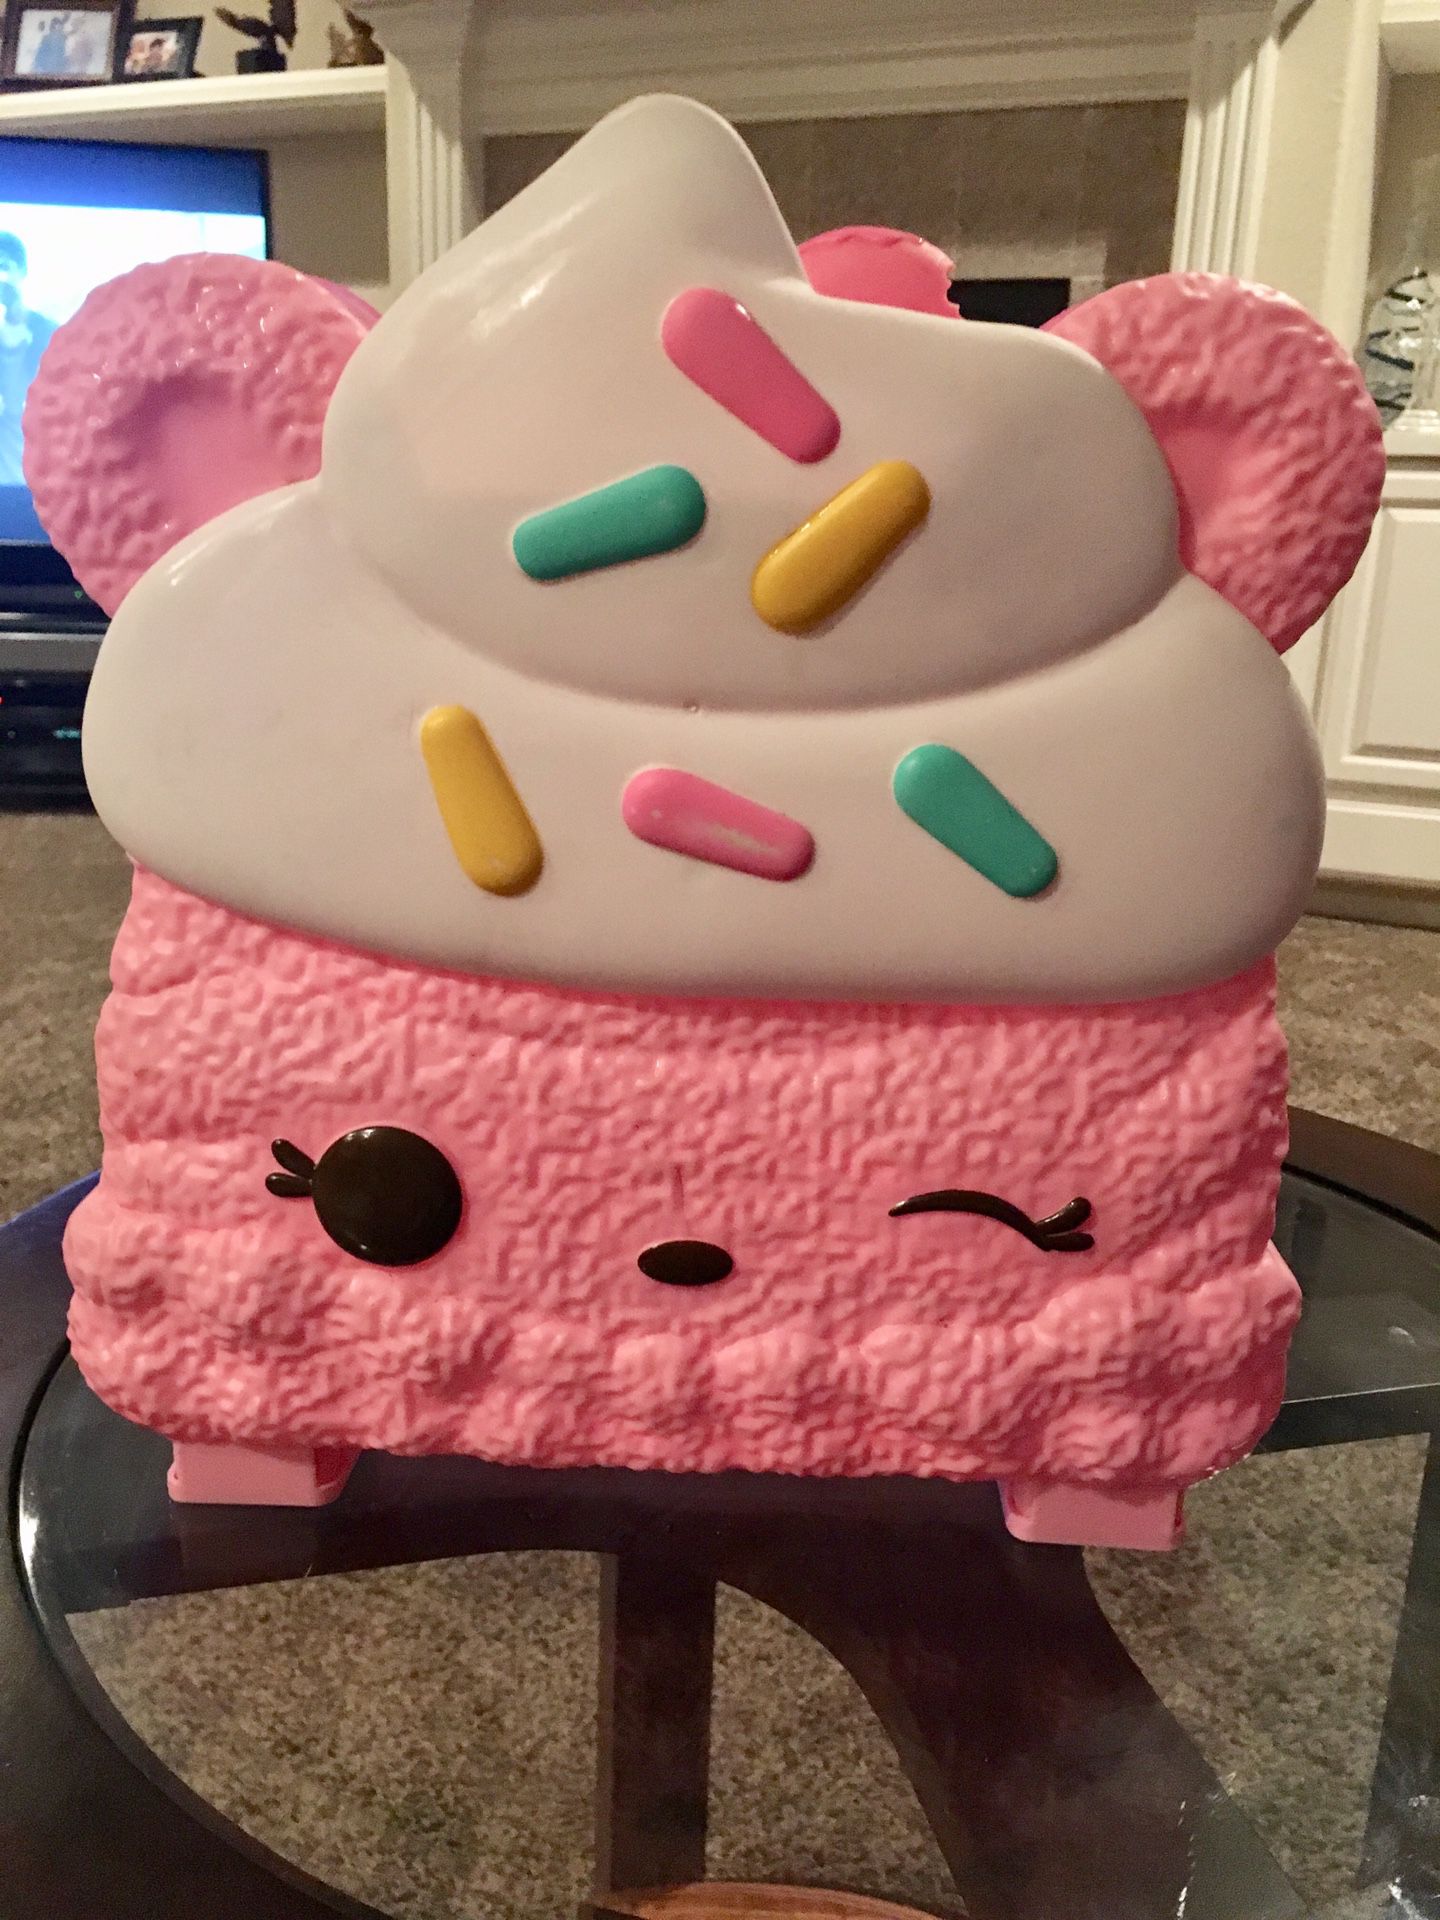 SHOPKINS ADORABLE CUPCAKE SHAPED CASE! HAS HANDLE AND SNAPS SHUT! GREAT CONDITION ! 12x12 INCHES ! CLEAN